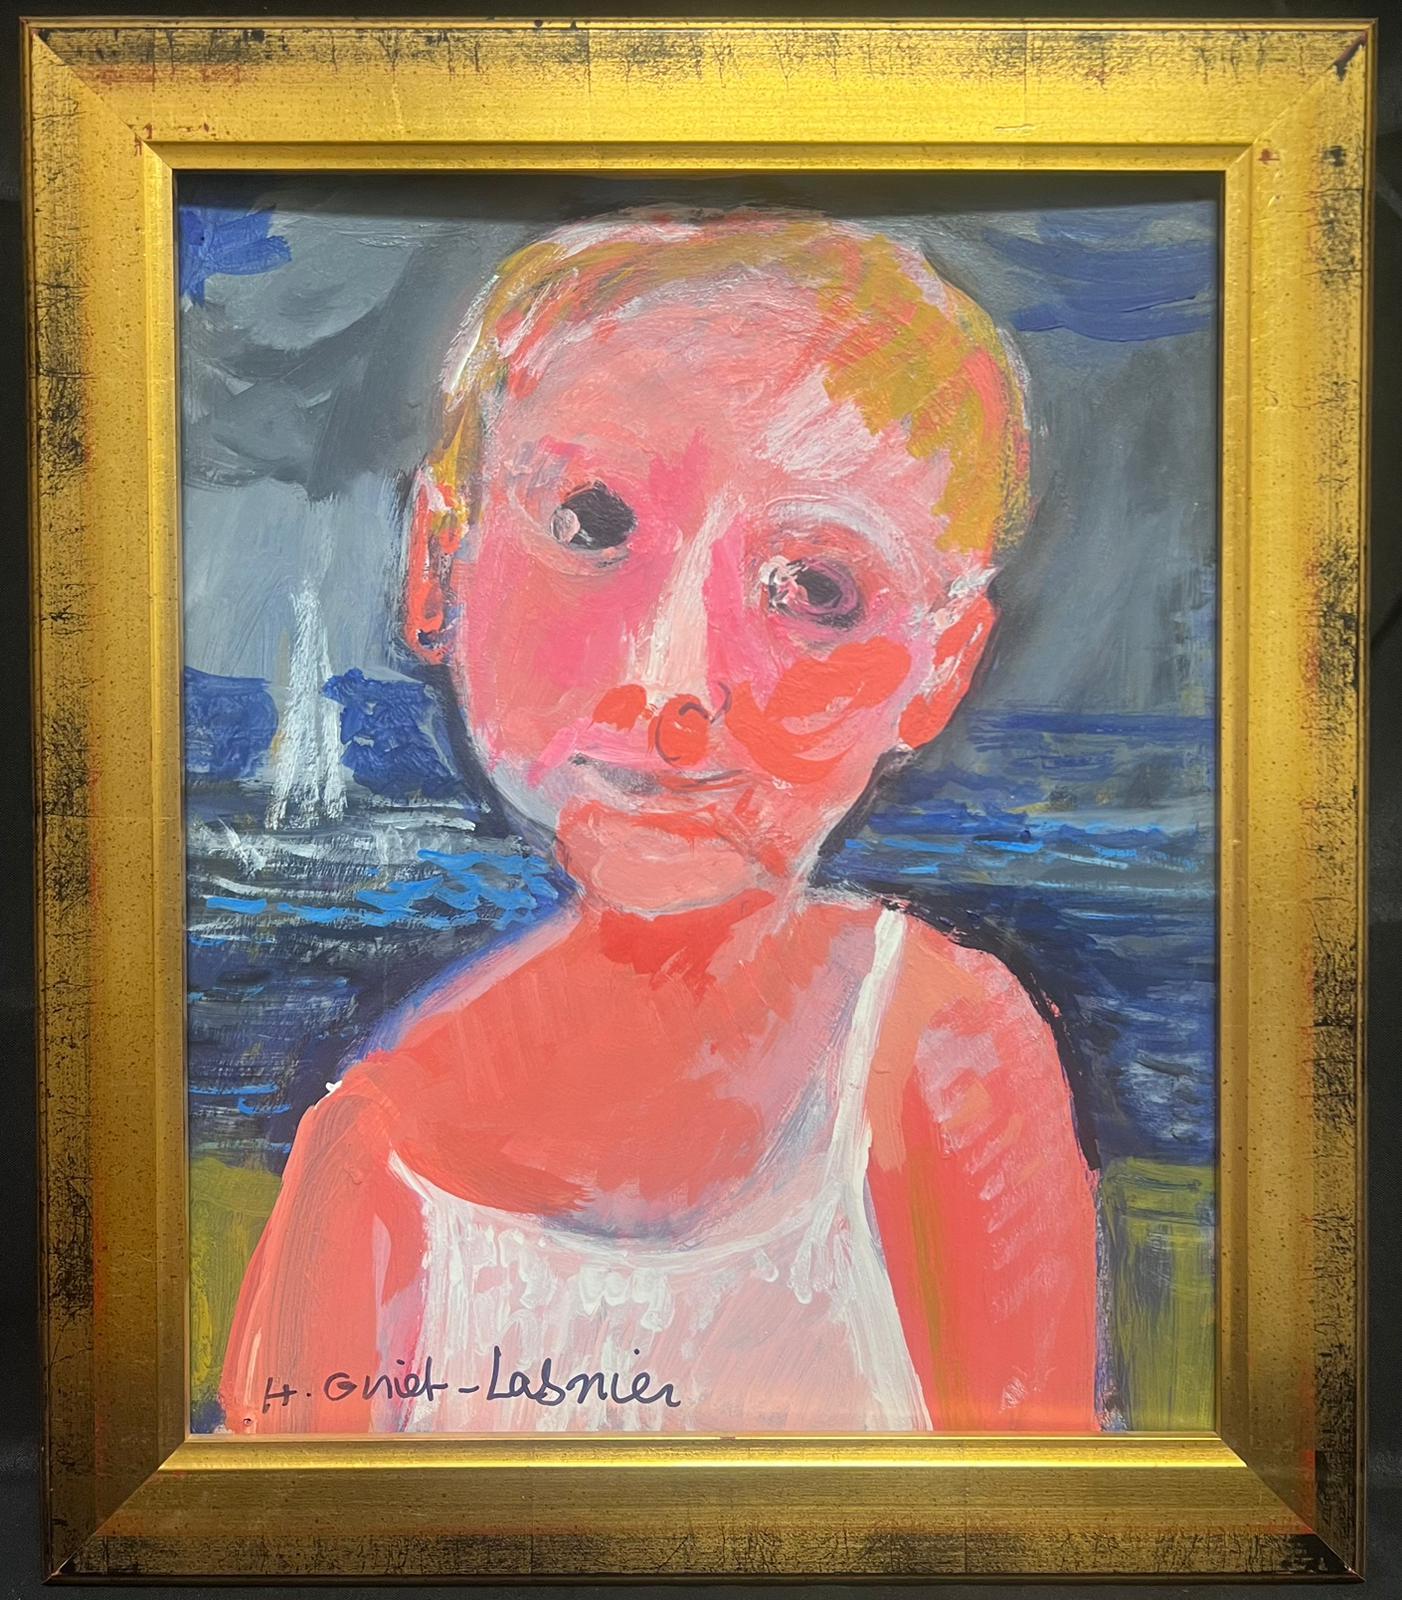 French Modernist Signed Oil Portrait of Child on Beach with Sea & Boat - Painting by Huguette Ginet-Lasnier 